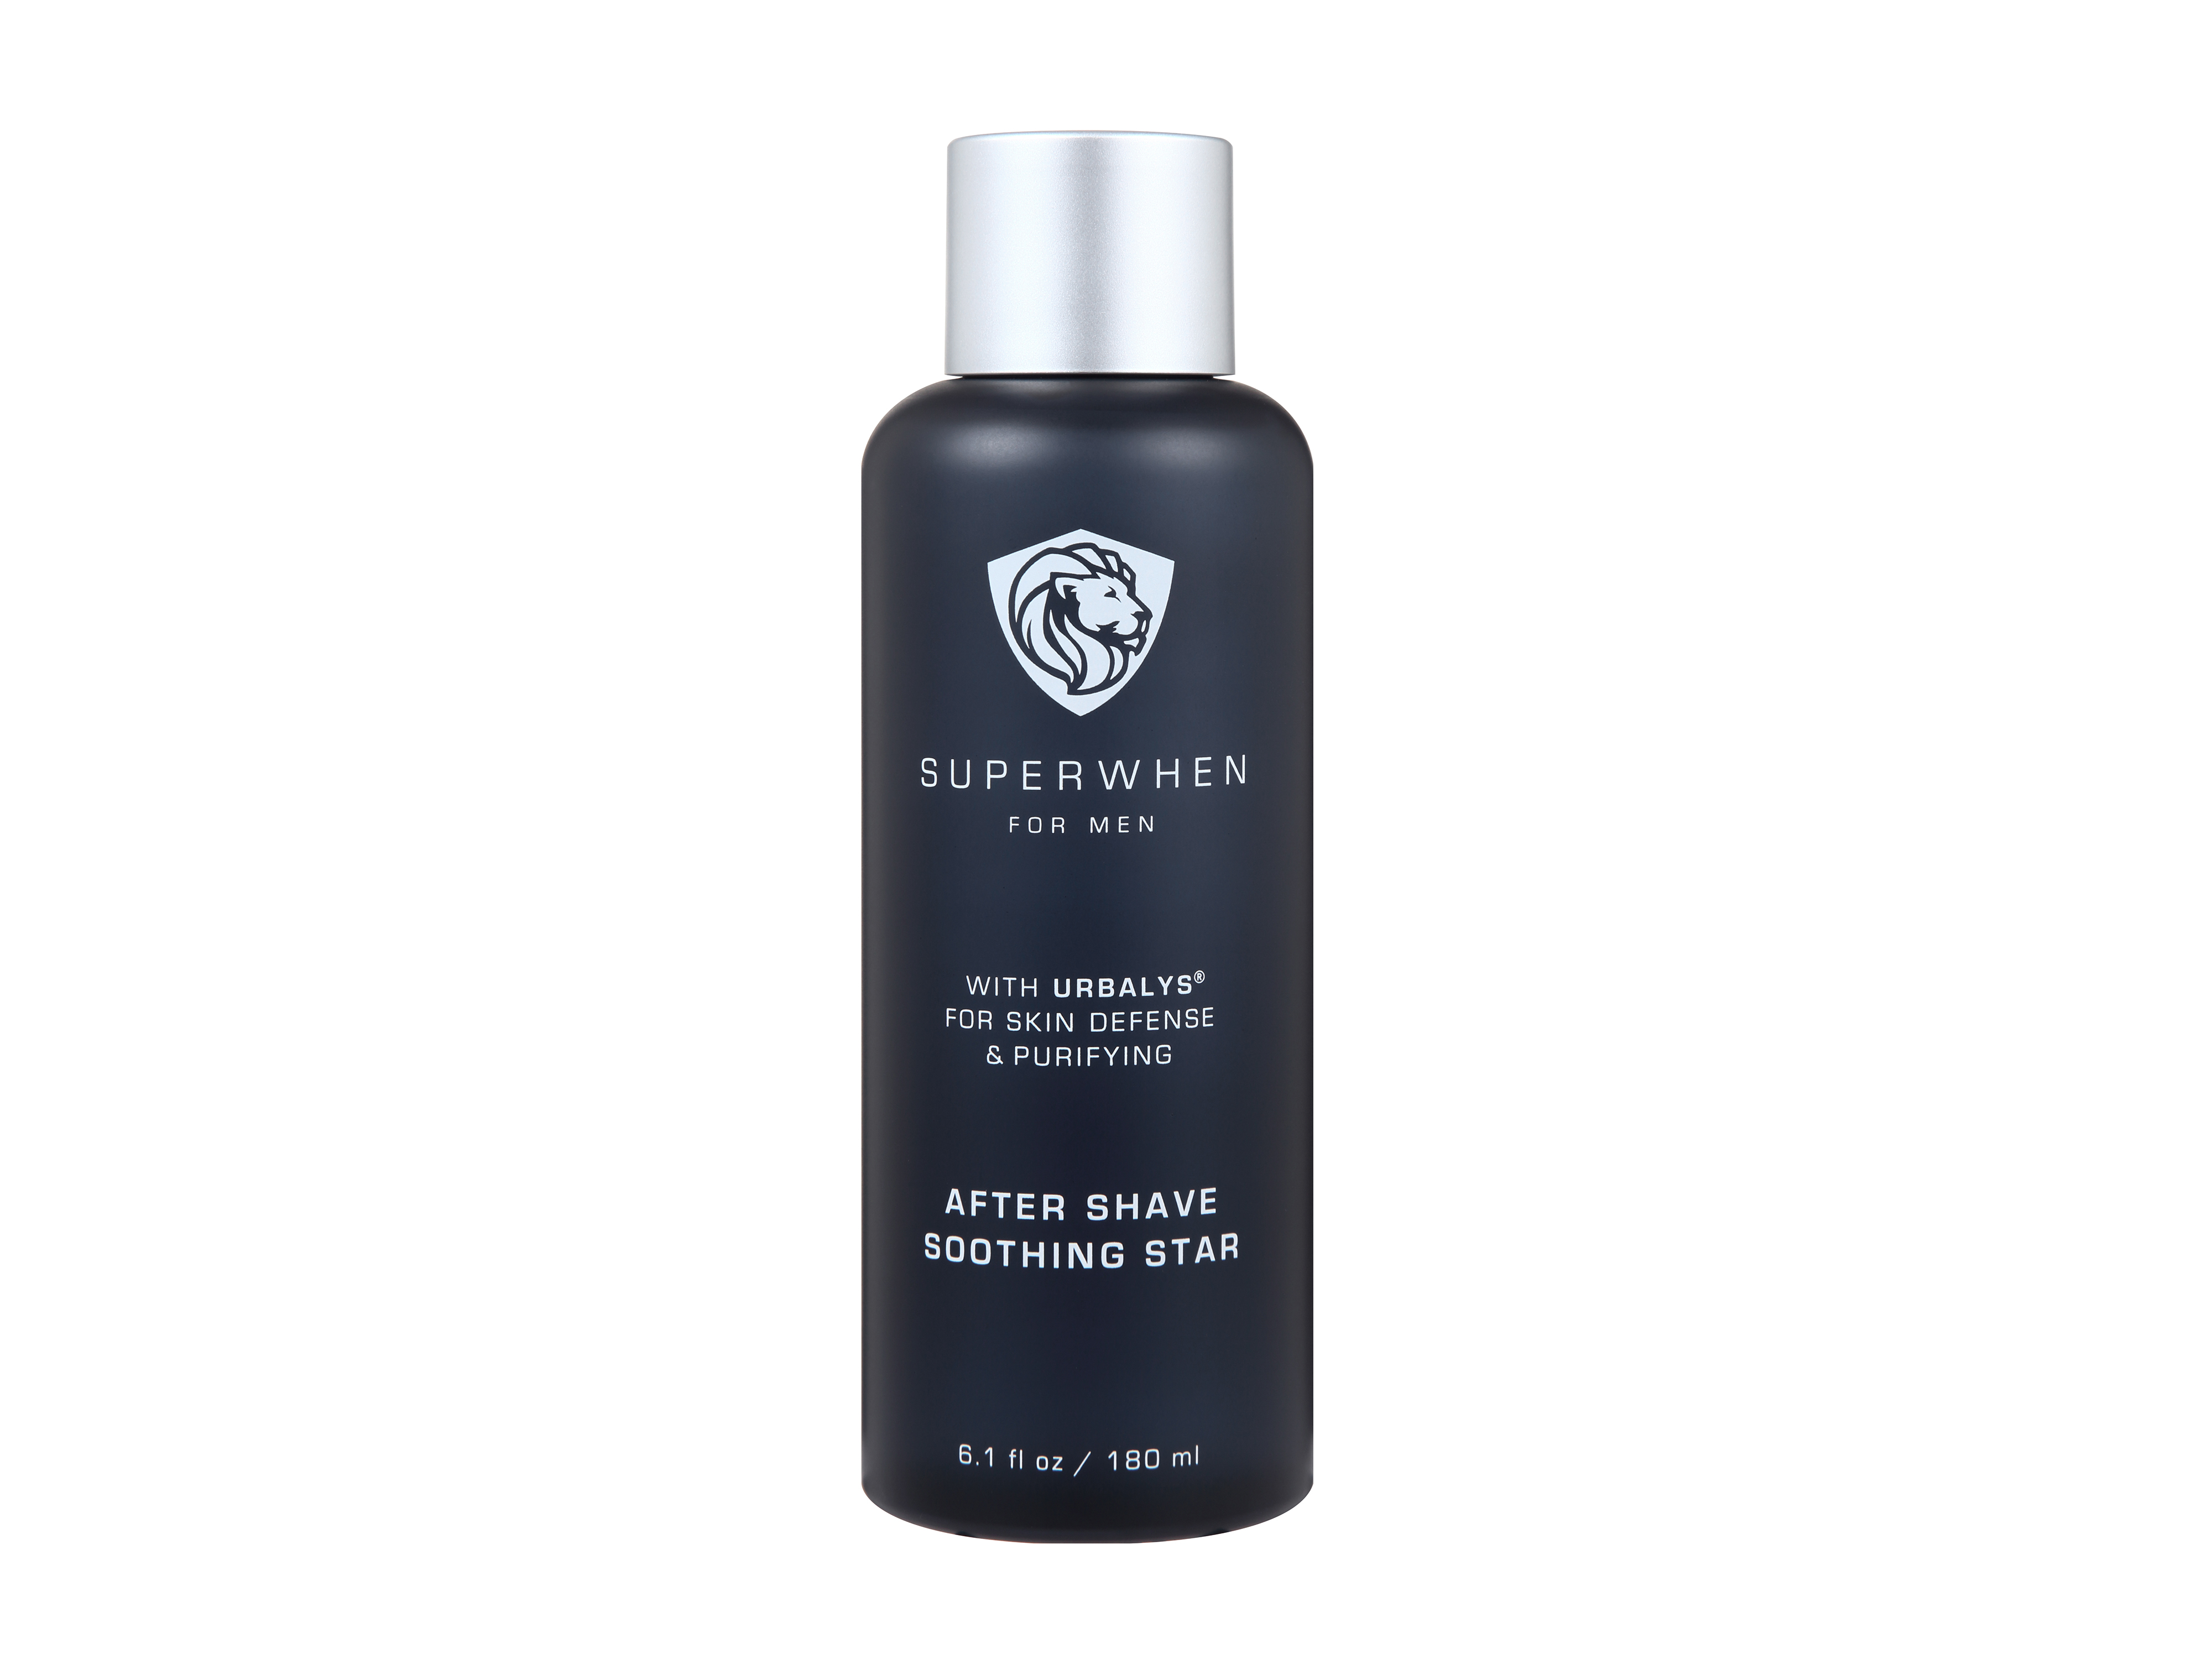 When Superwhen Men After Shave Soothing Star, 180 ml